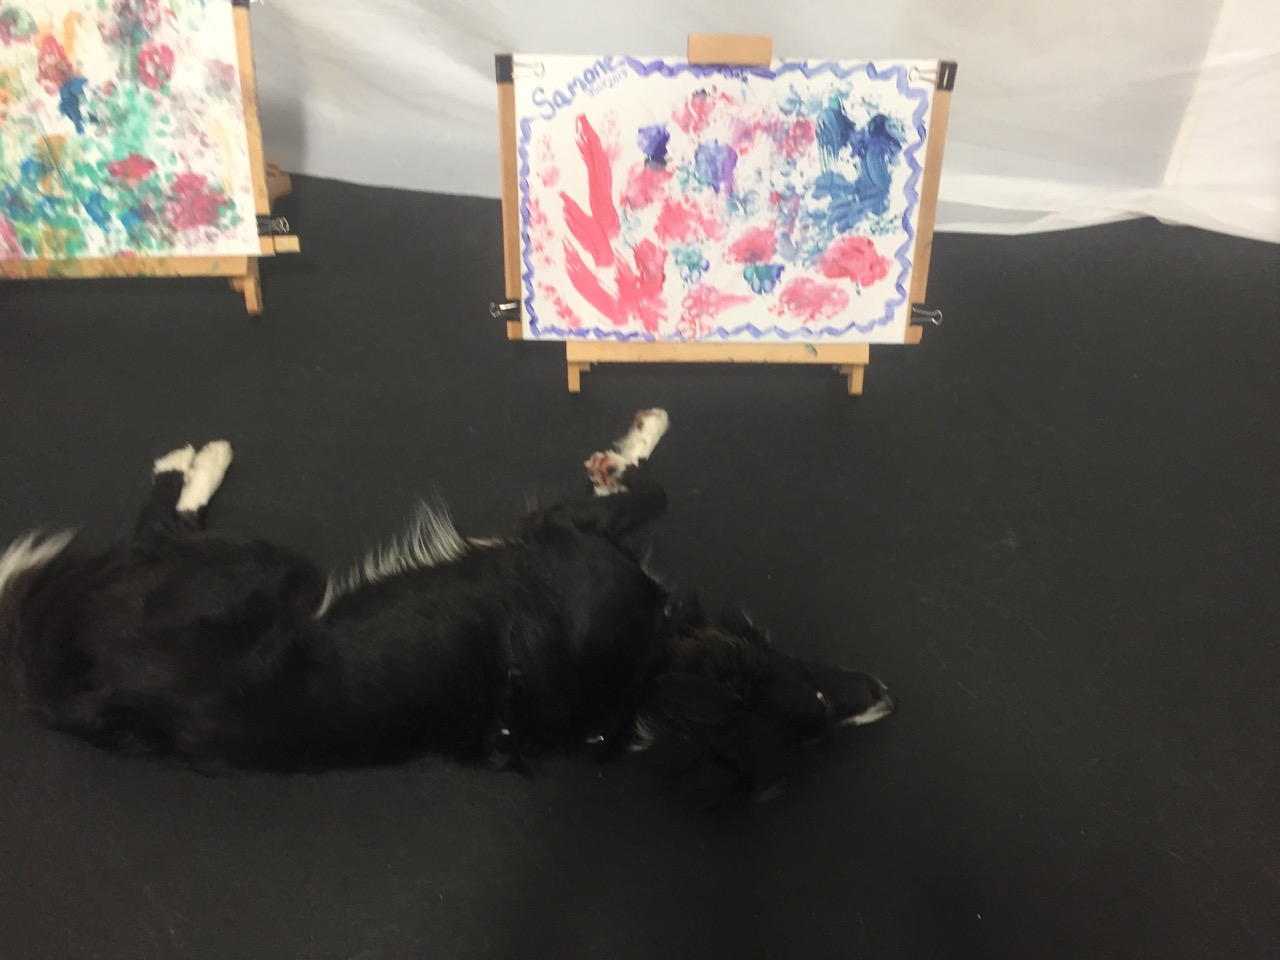 Fun w/painting class: Painting can be exhausting!